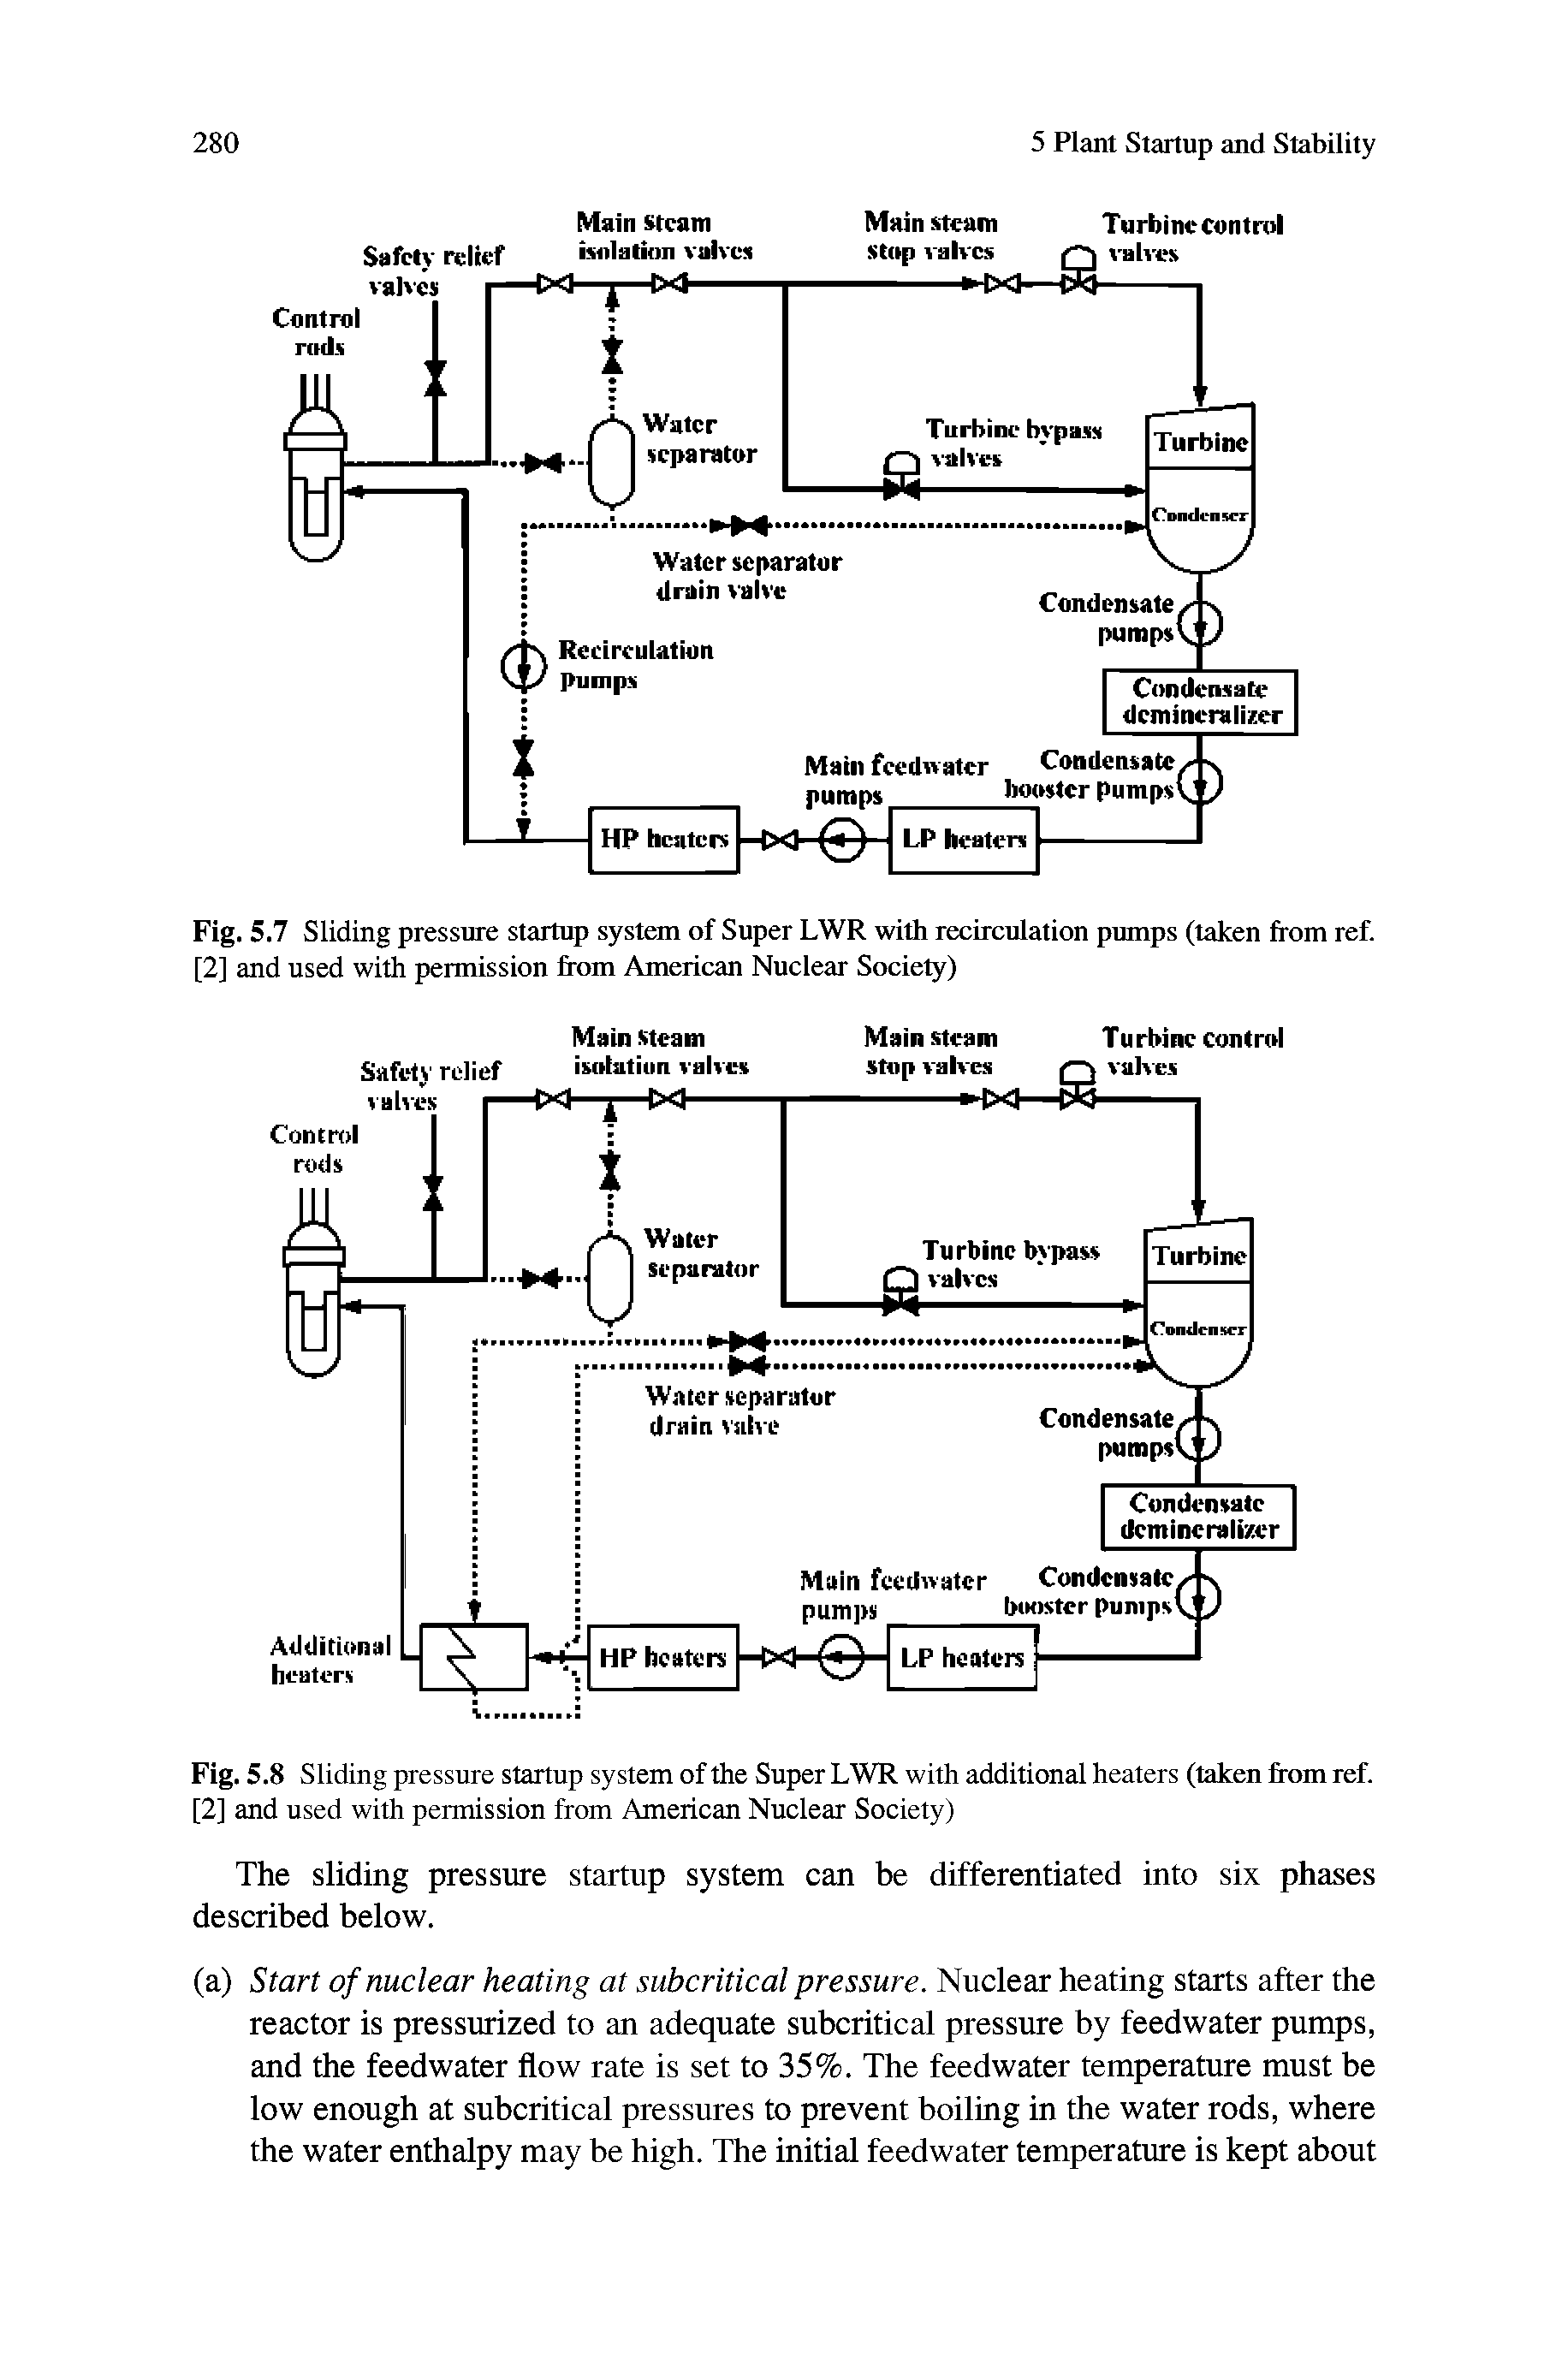 Fig. 5.7 Sliding pressure startup system of Super LWR with recirculation pumps (taken from ref. [2] and used with permission from American Nuclear Society)...